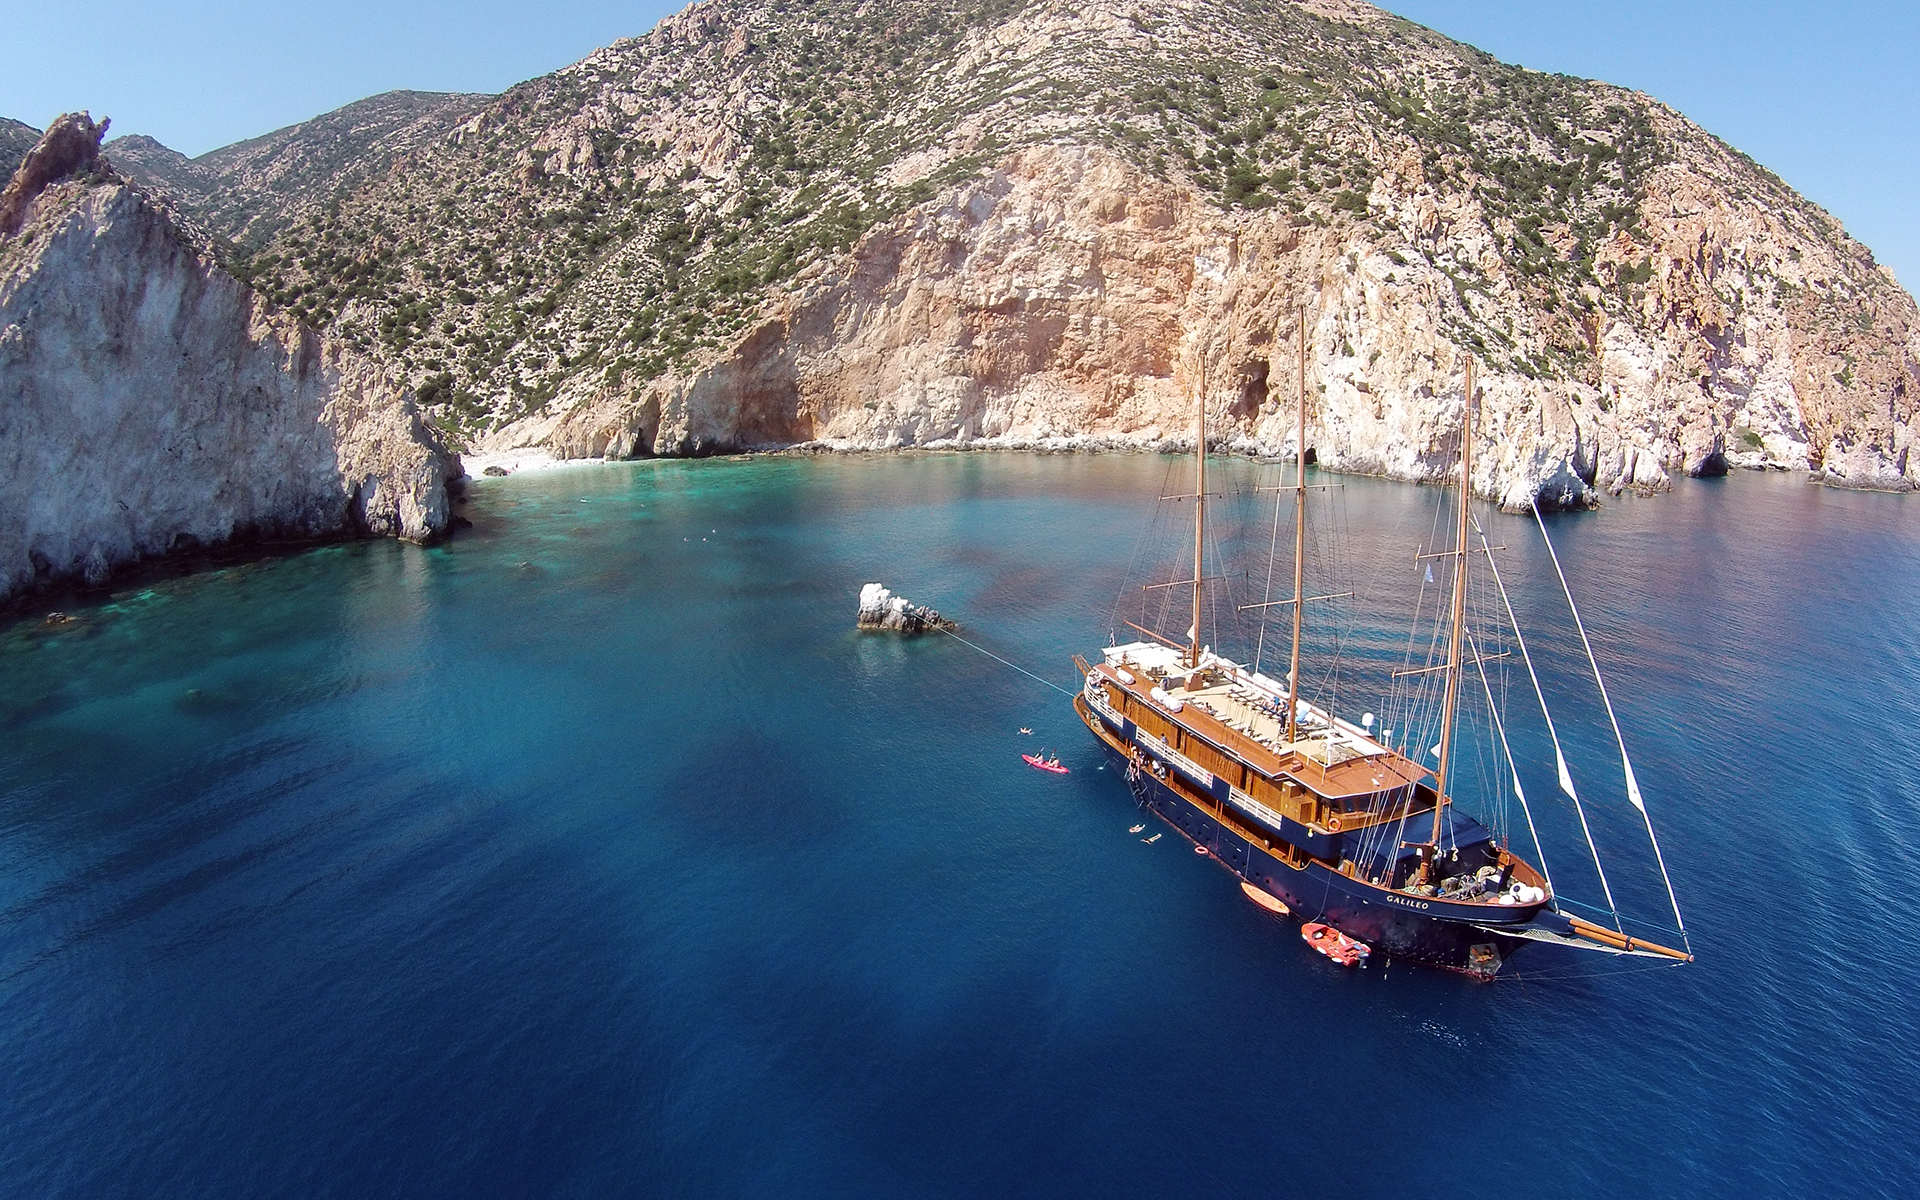 A small sailing ship is seen at anchor in the Mediterranean Sea in a remote cove with tall cliffs and a white beach